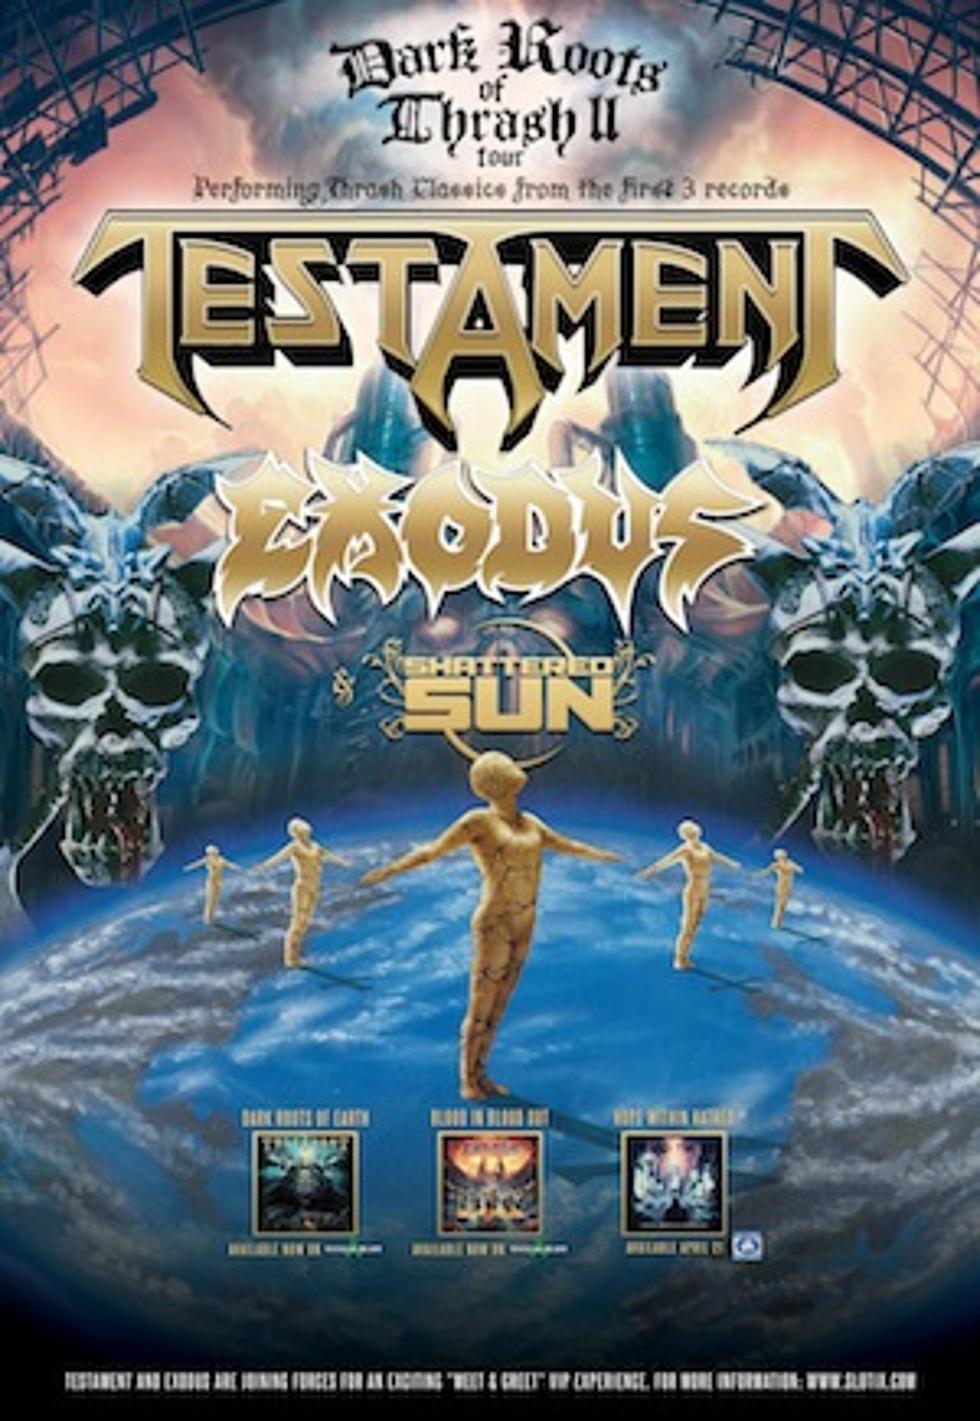 Testament, Exodus + Shattered Sun Team Up for 2015 North American Tour